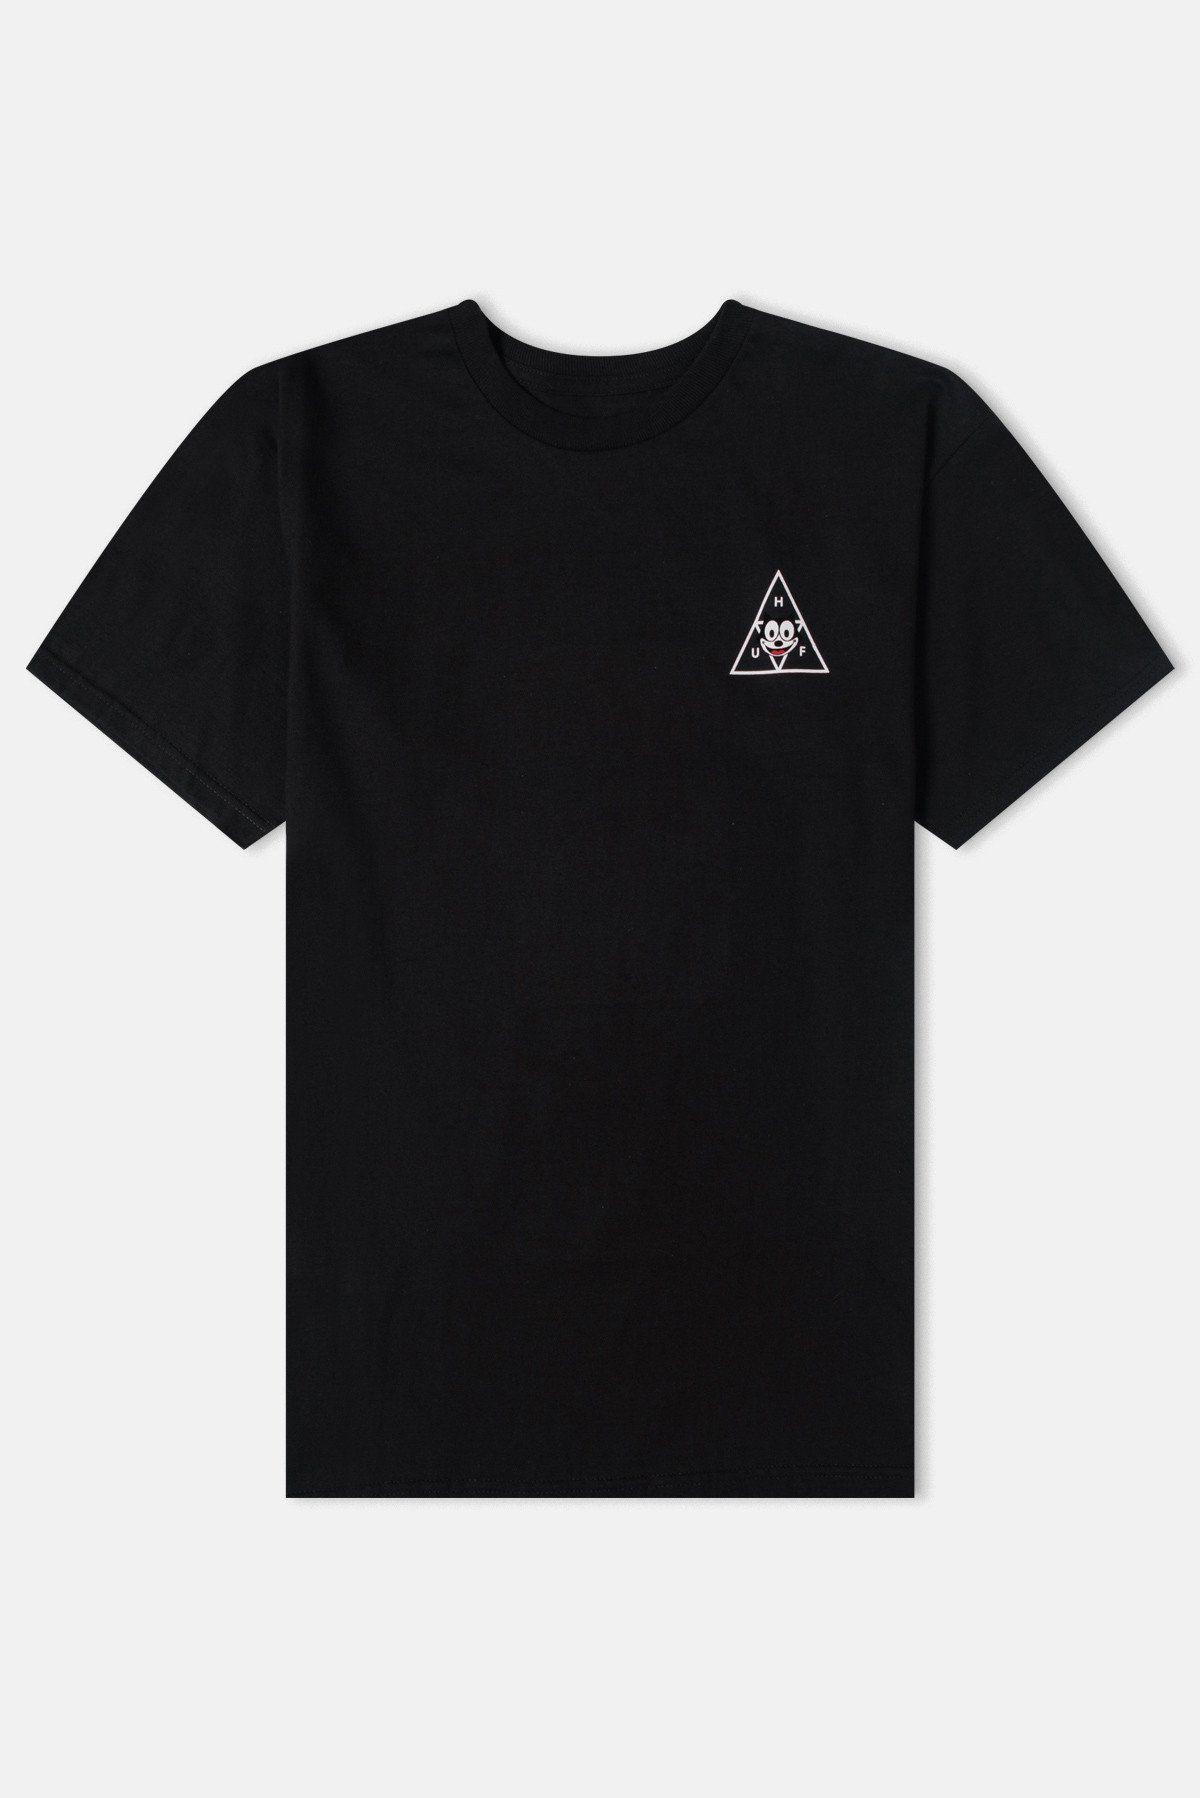 Black Cat Triangle Logo - Huf X Felix The Cat Triple Triangle S S T Shirt Available From Priory